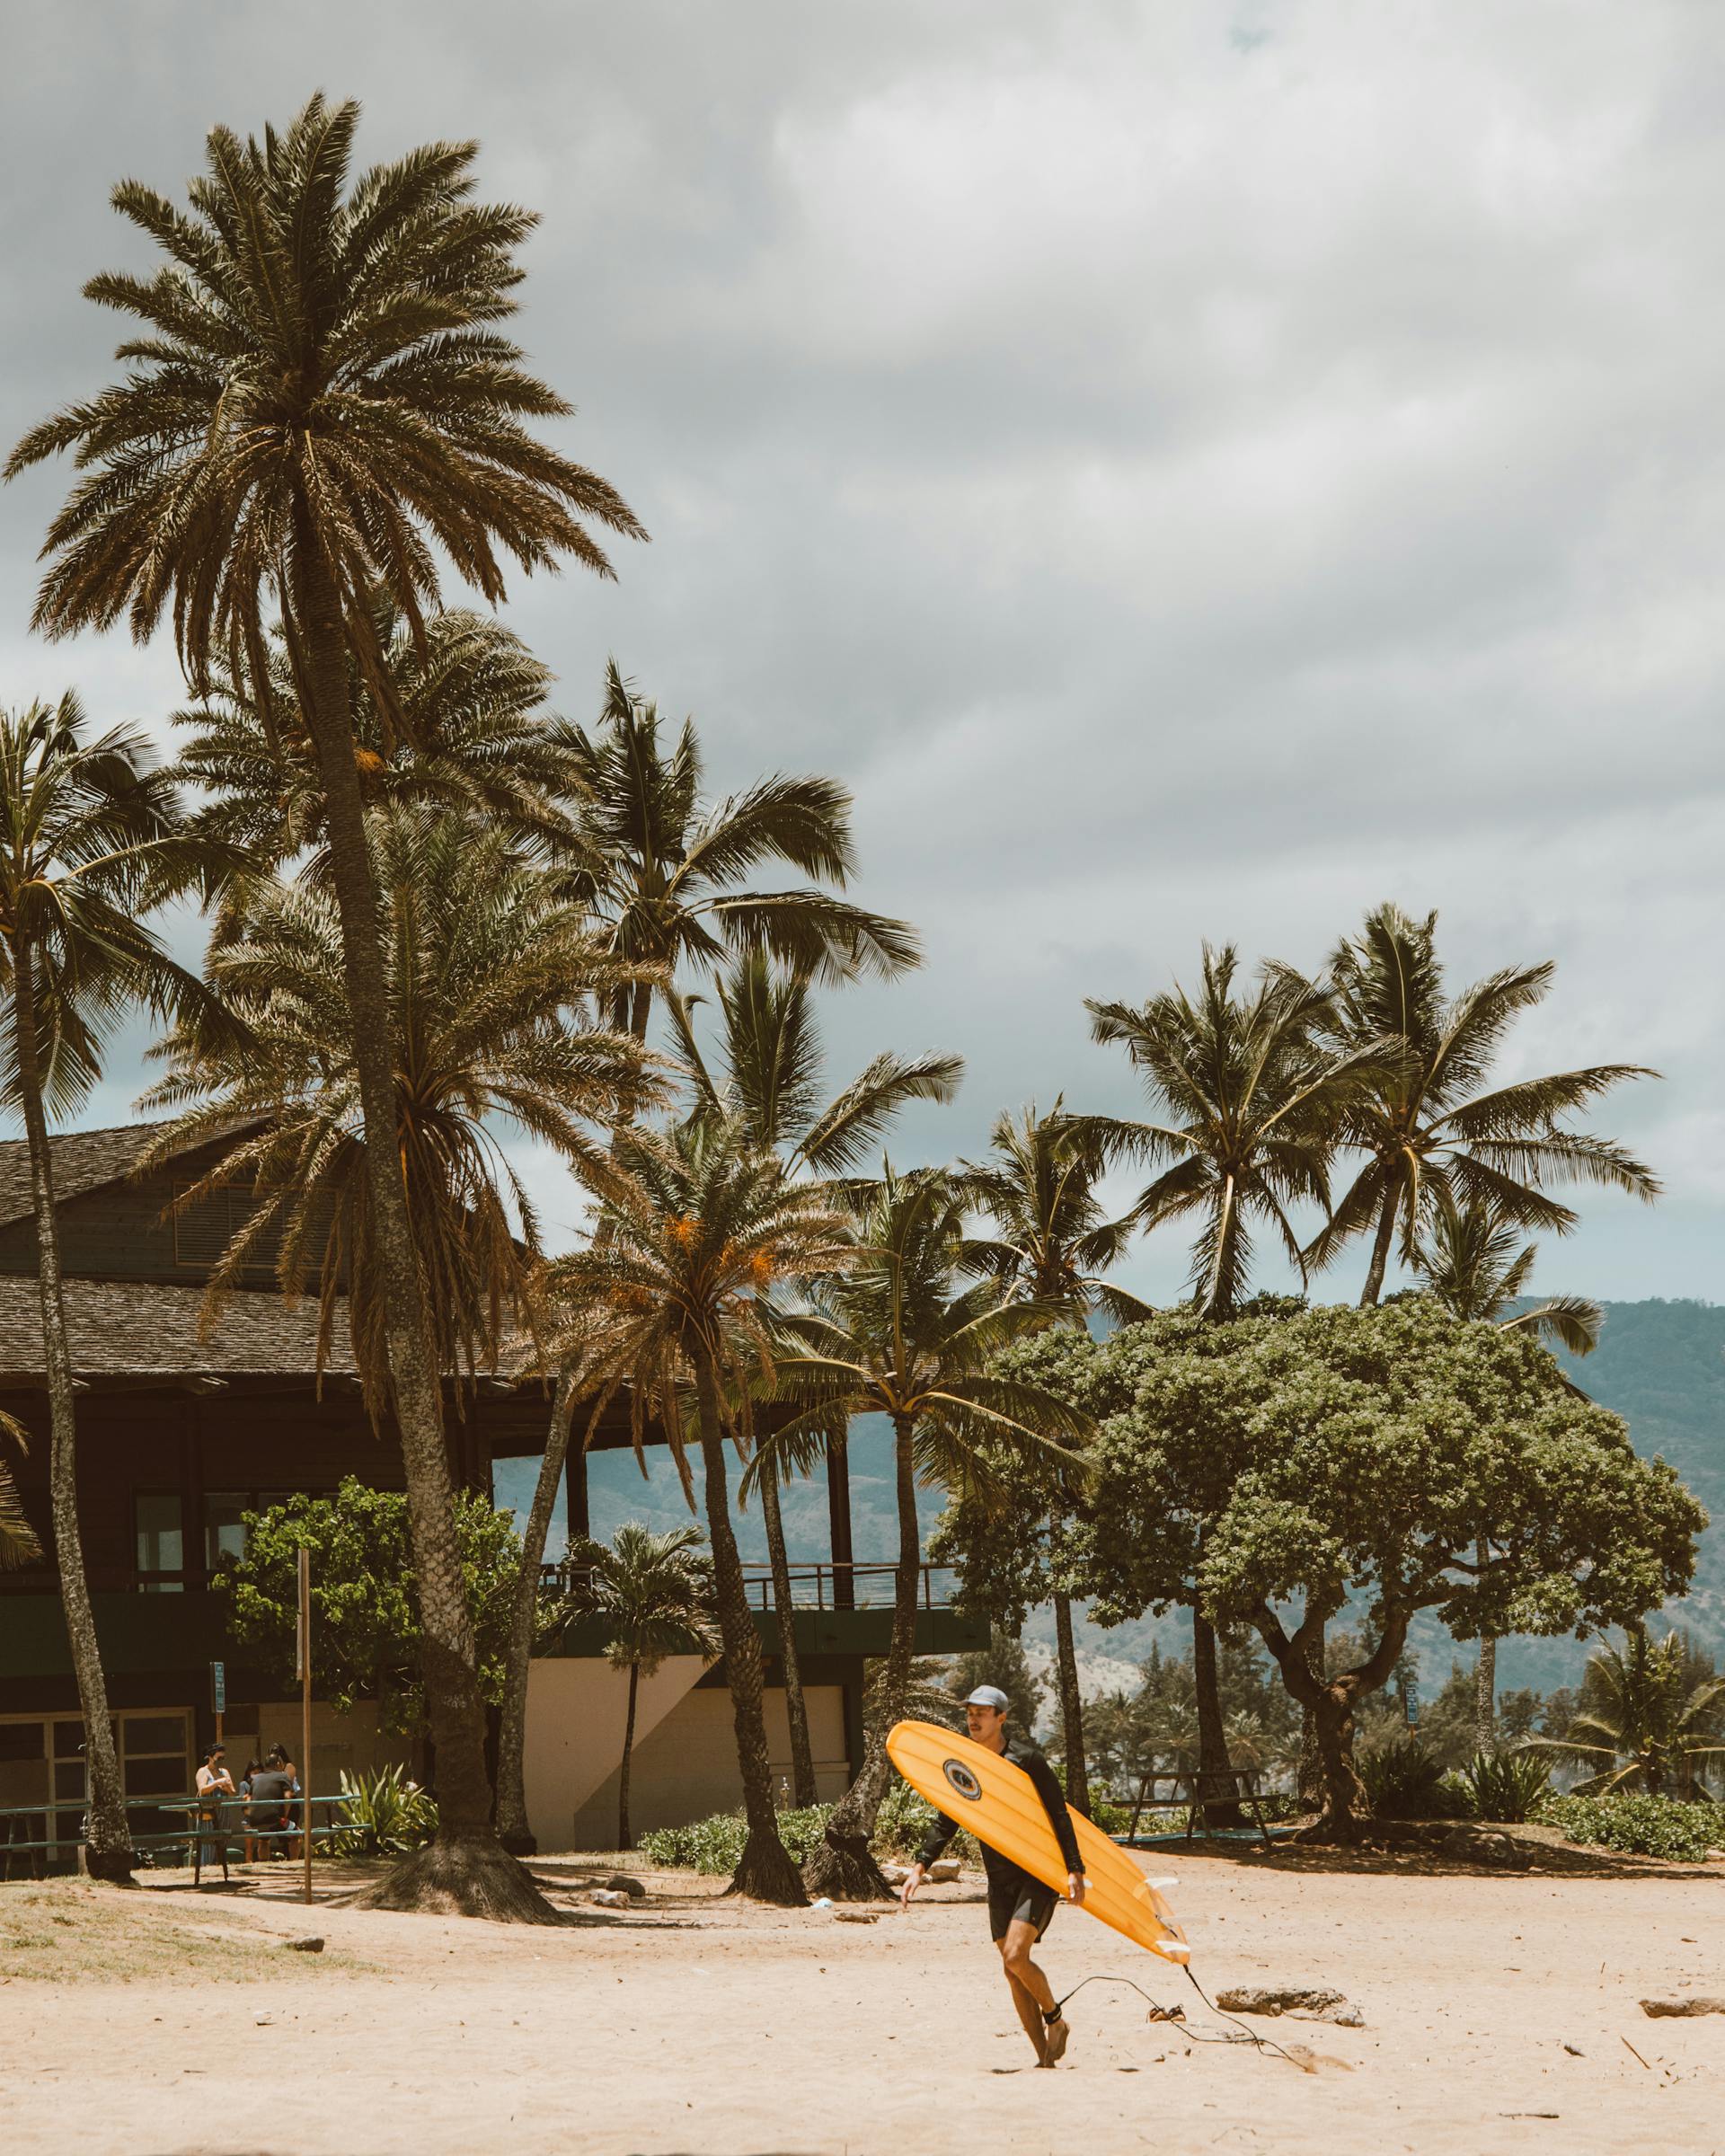 A man walking with a surfboard on a beach | Source: Pexels